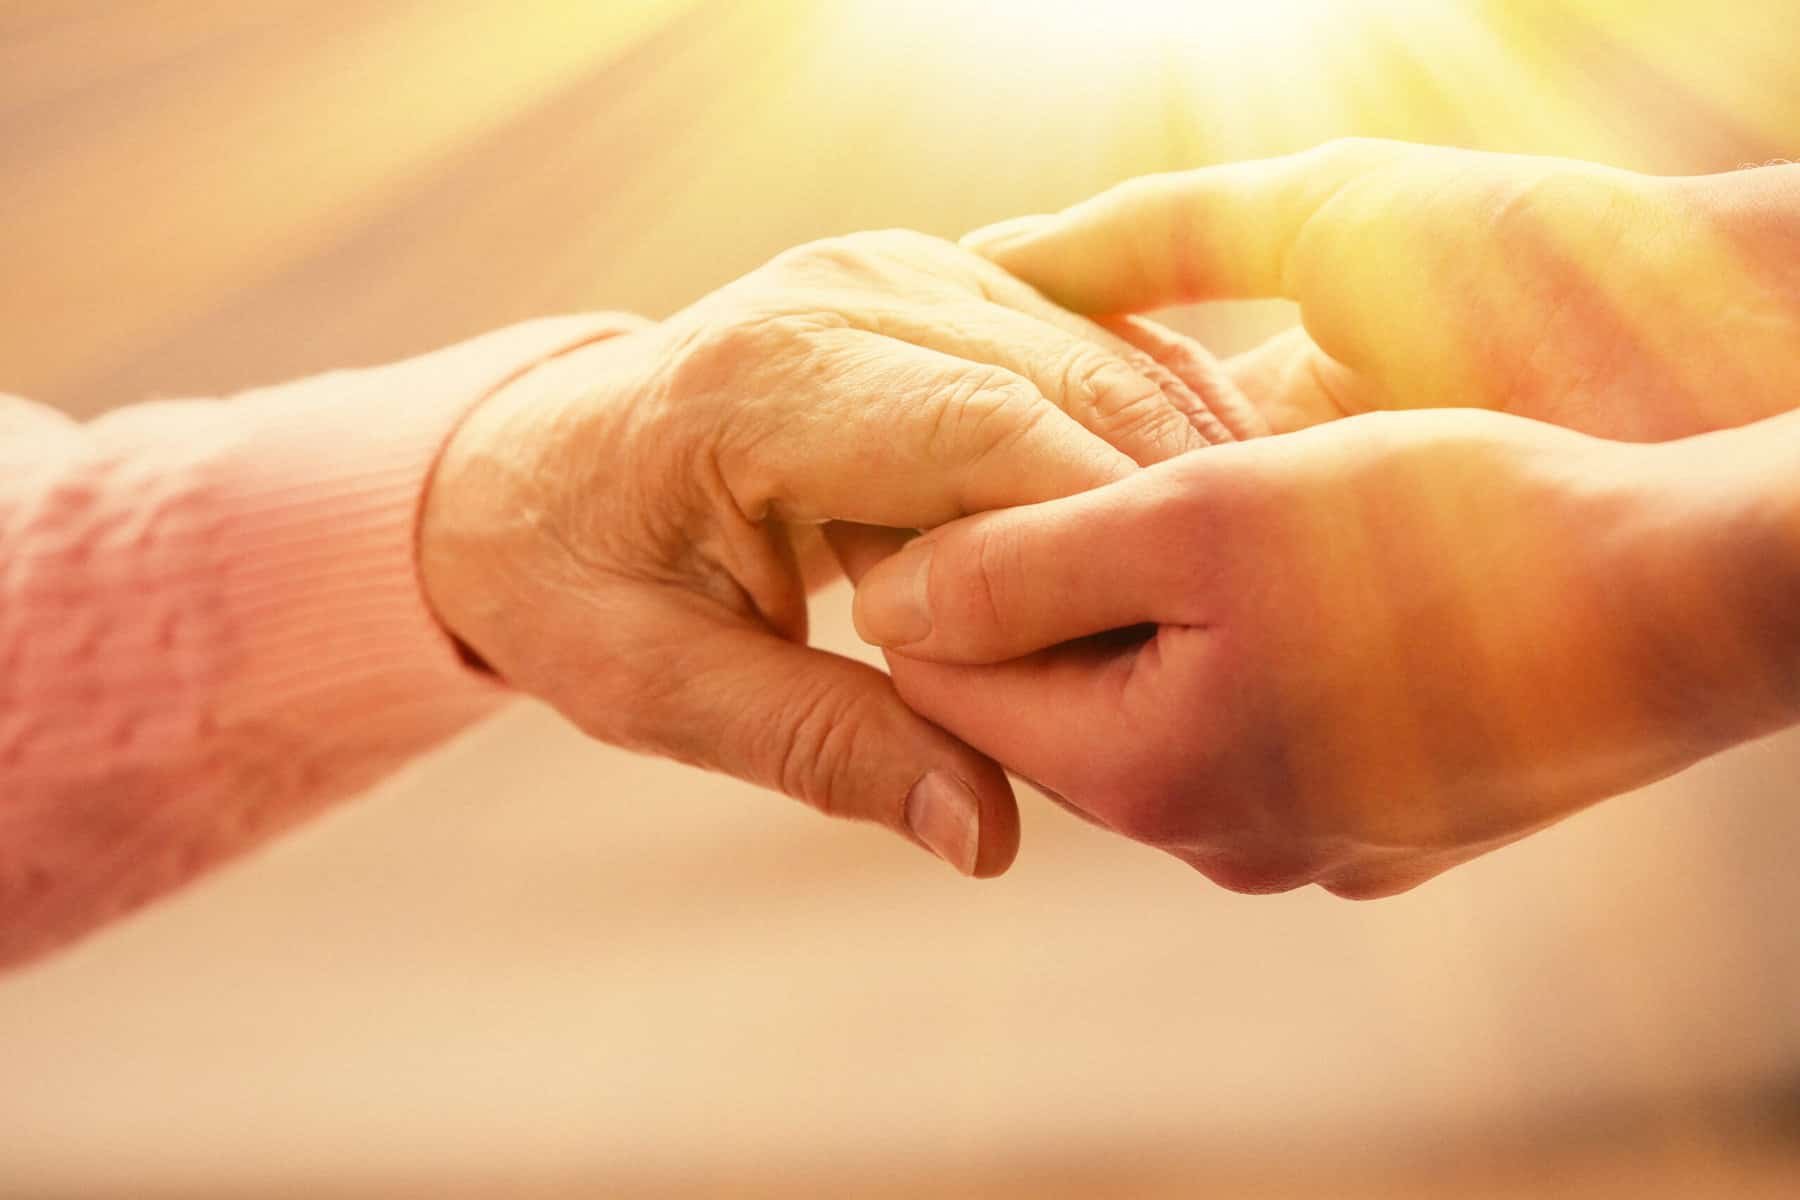 A closeup image of an older woman's hand being held by a younger pair of hands with a light and sunny background.